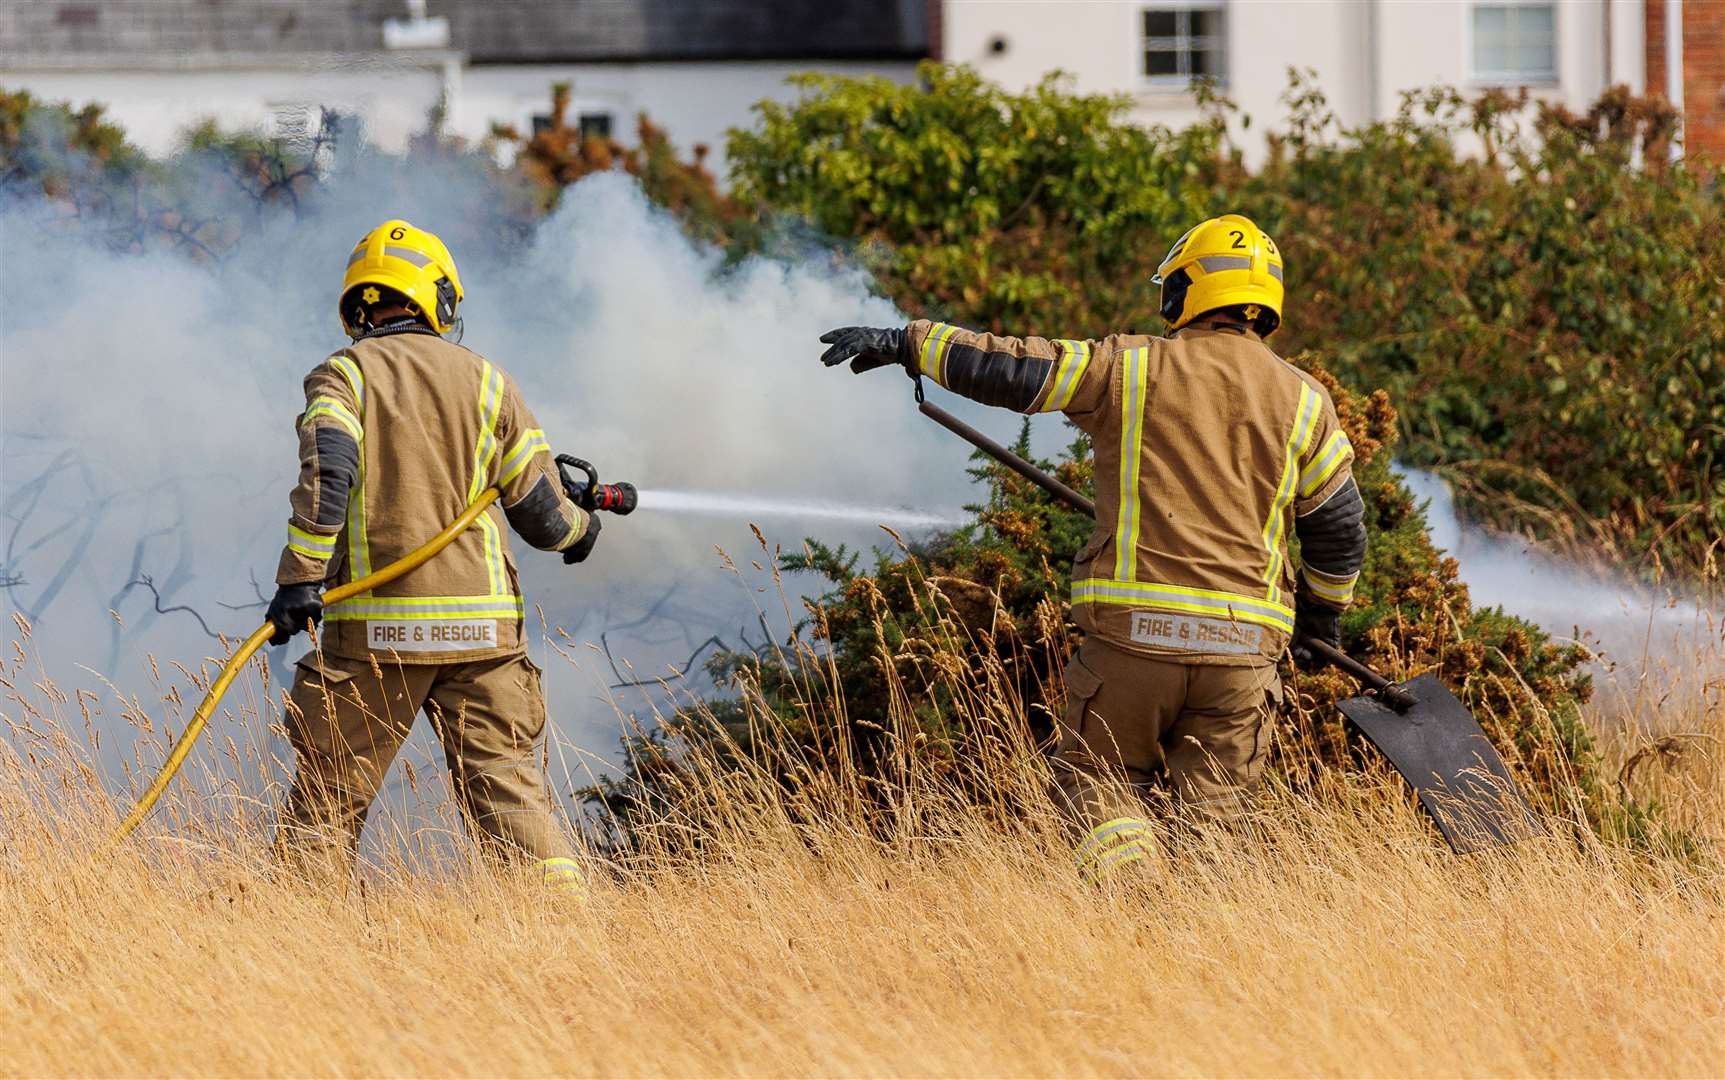 Dry, parched ground meant an increase in fires. Photo: www.renoufdesign.co.uk.